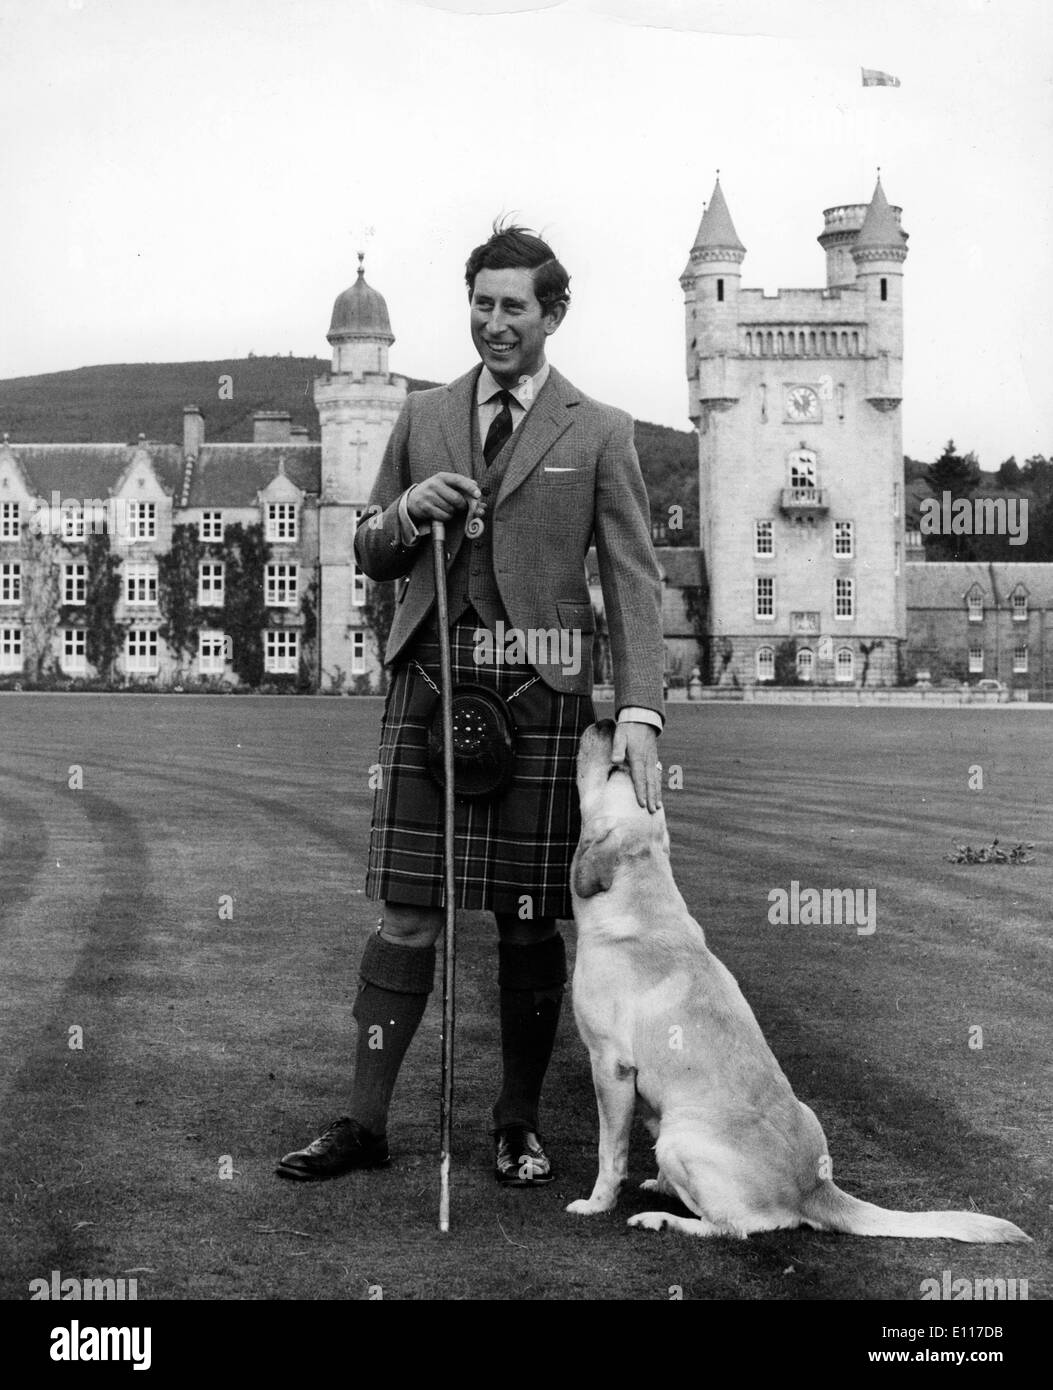 Prince Charles with his dog outside the castle Stock Photo